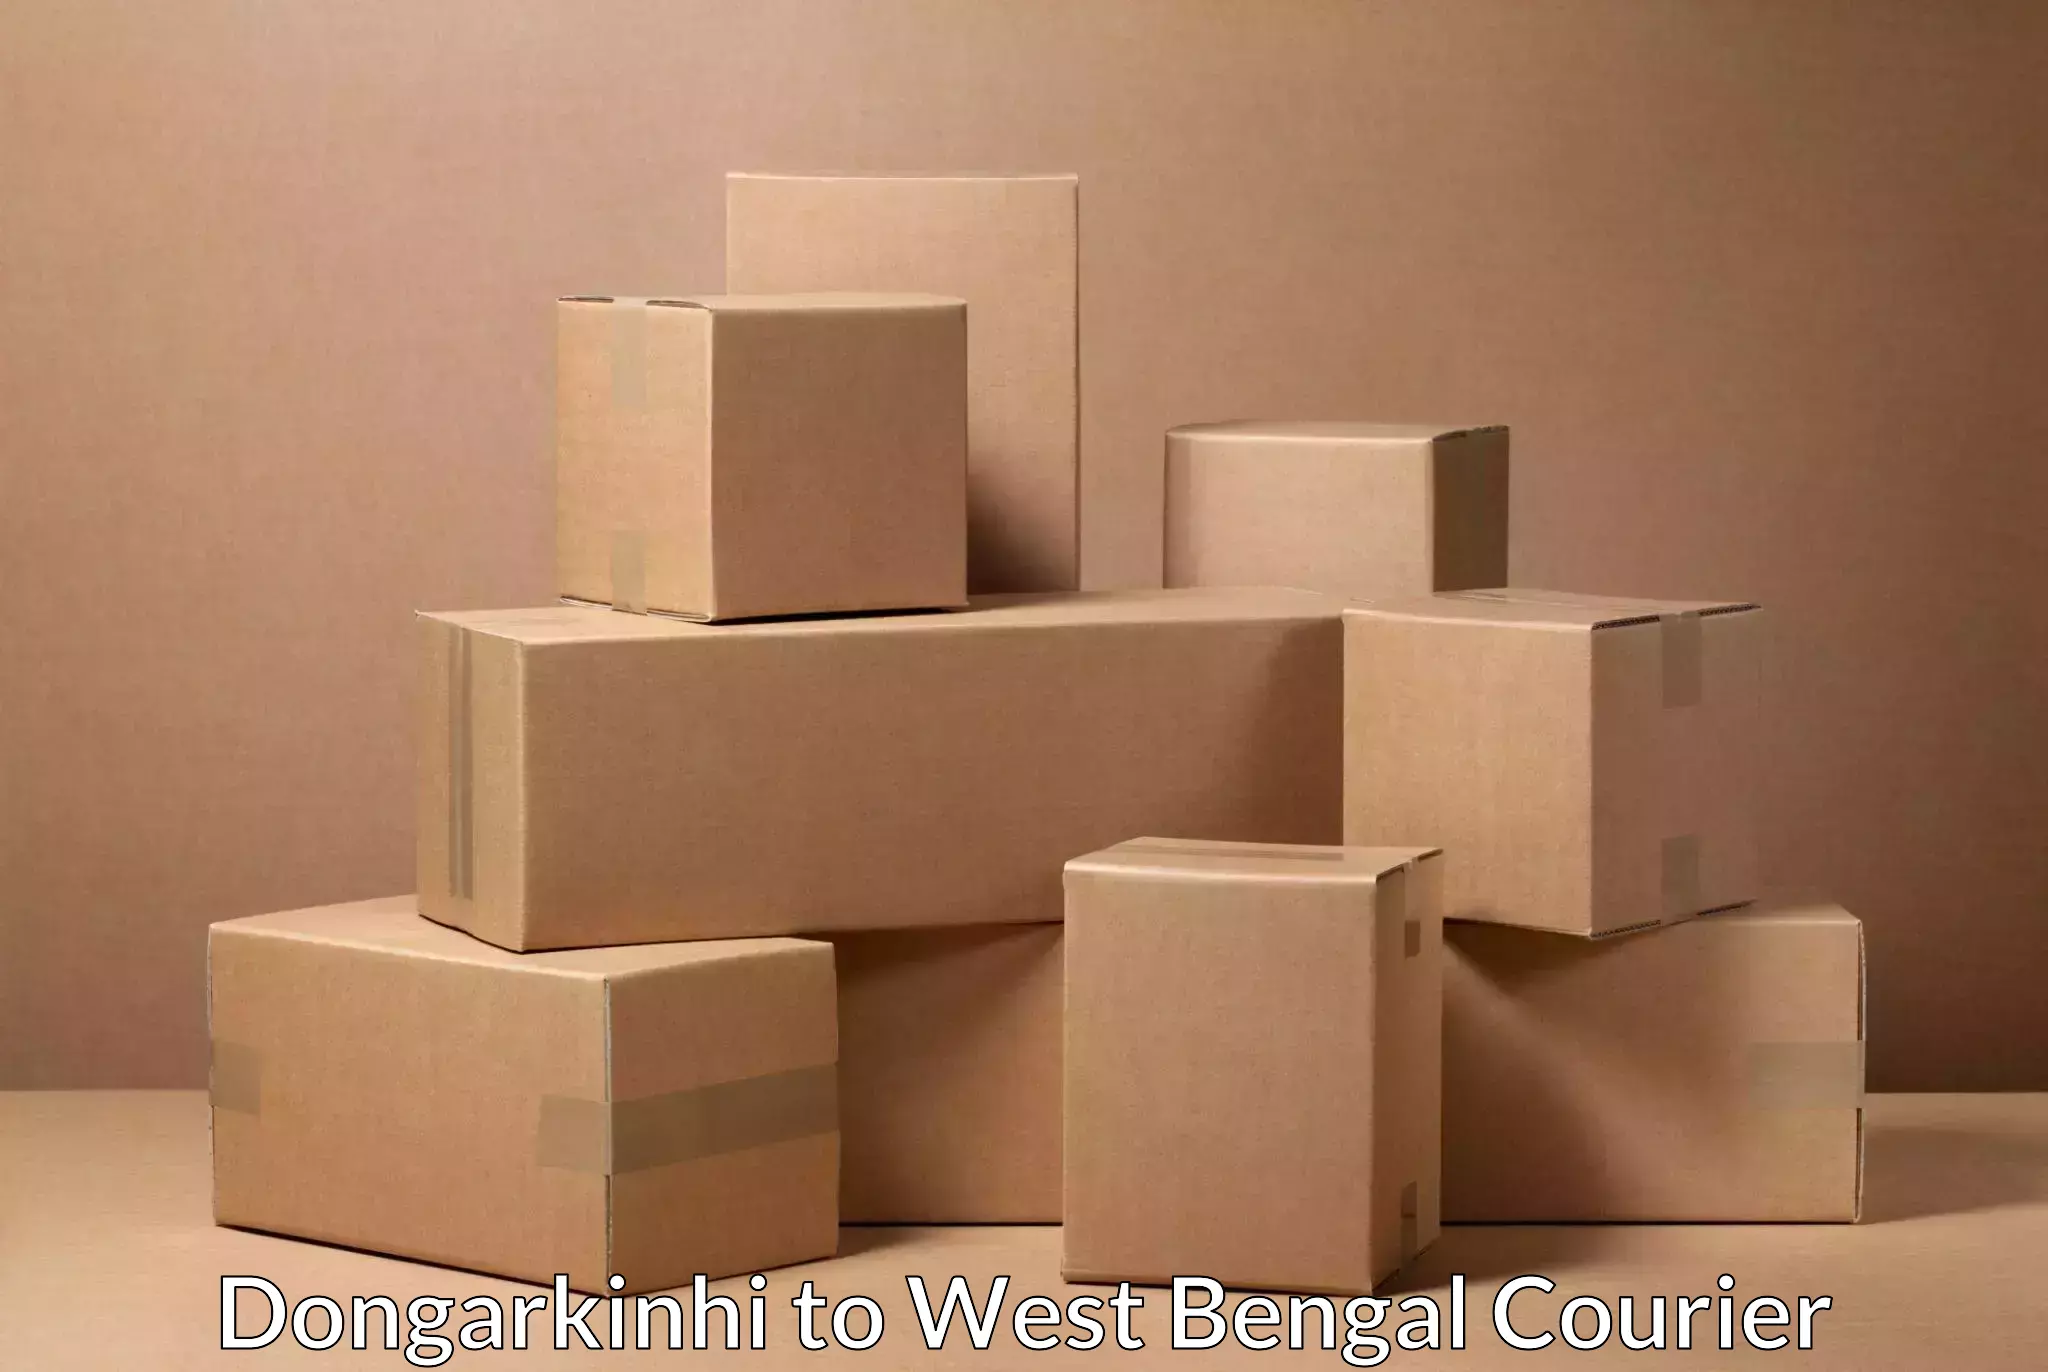 Reliable delivery network Dongarkinhi to West Bengal